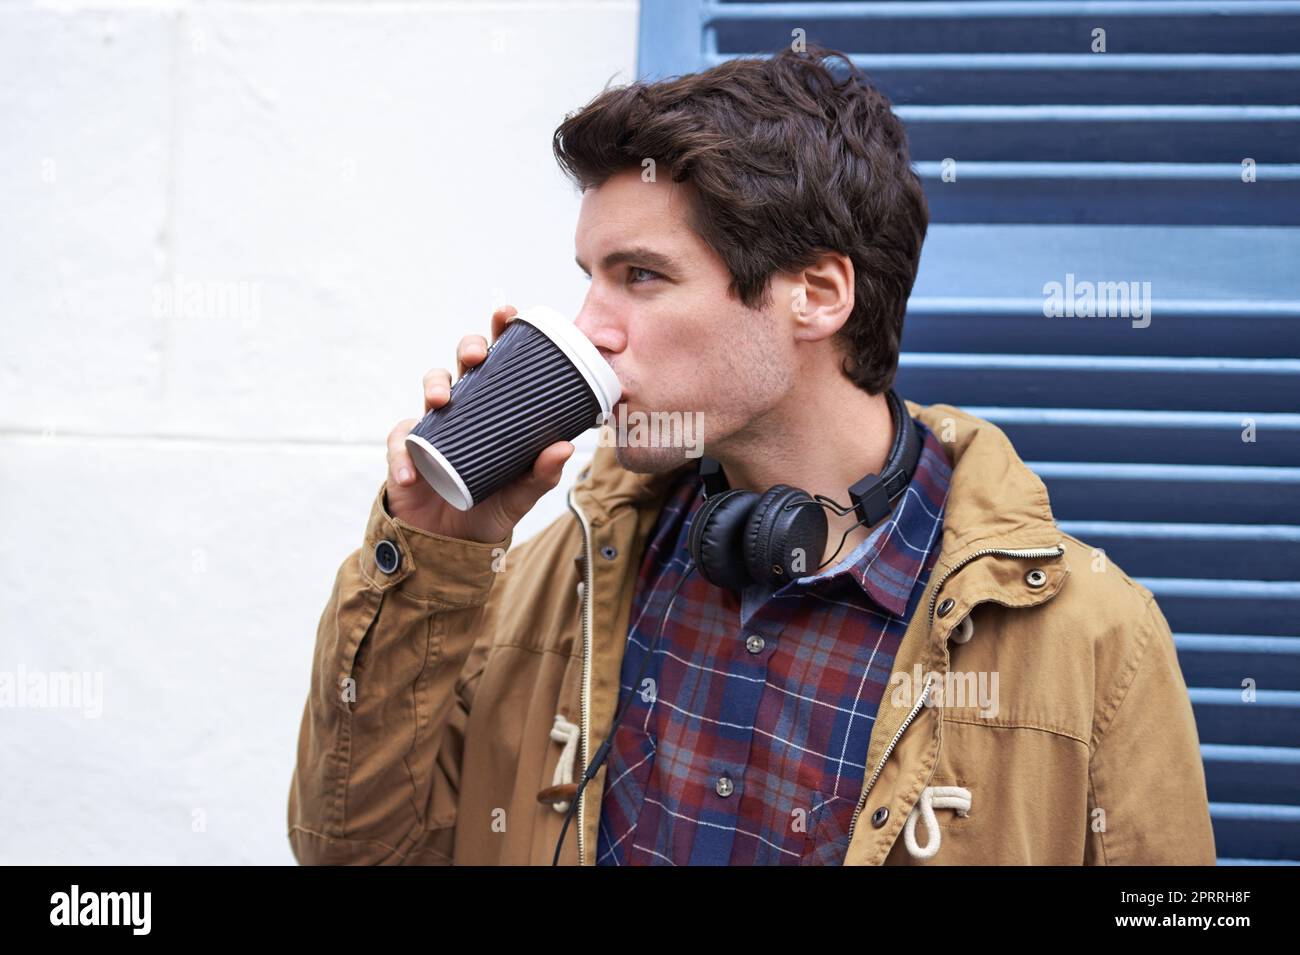 Out and about, around downtown. a handsome young man chilling in a downtown district. Stock Photo